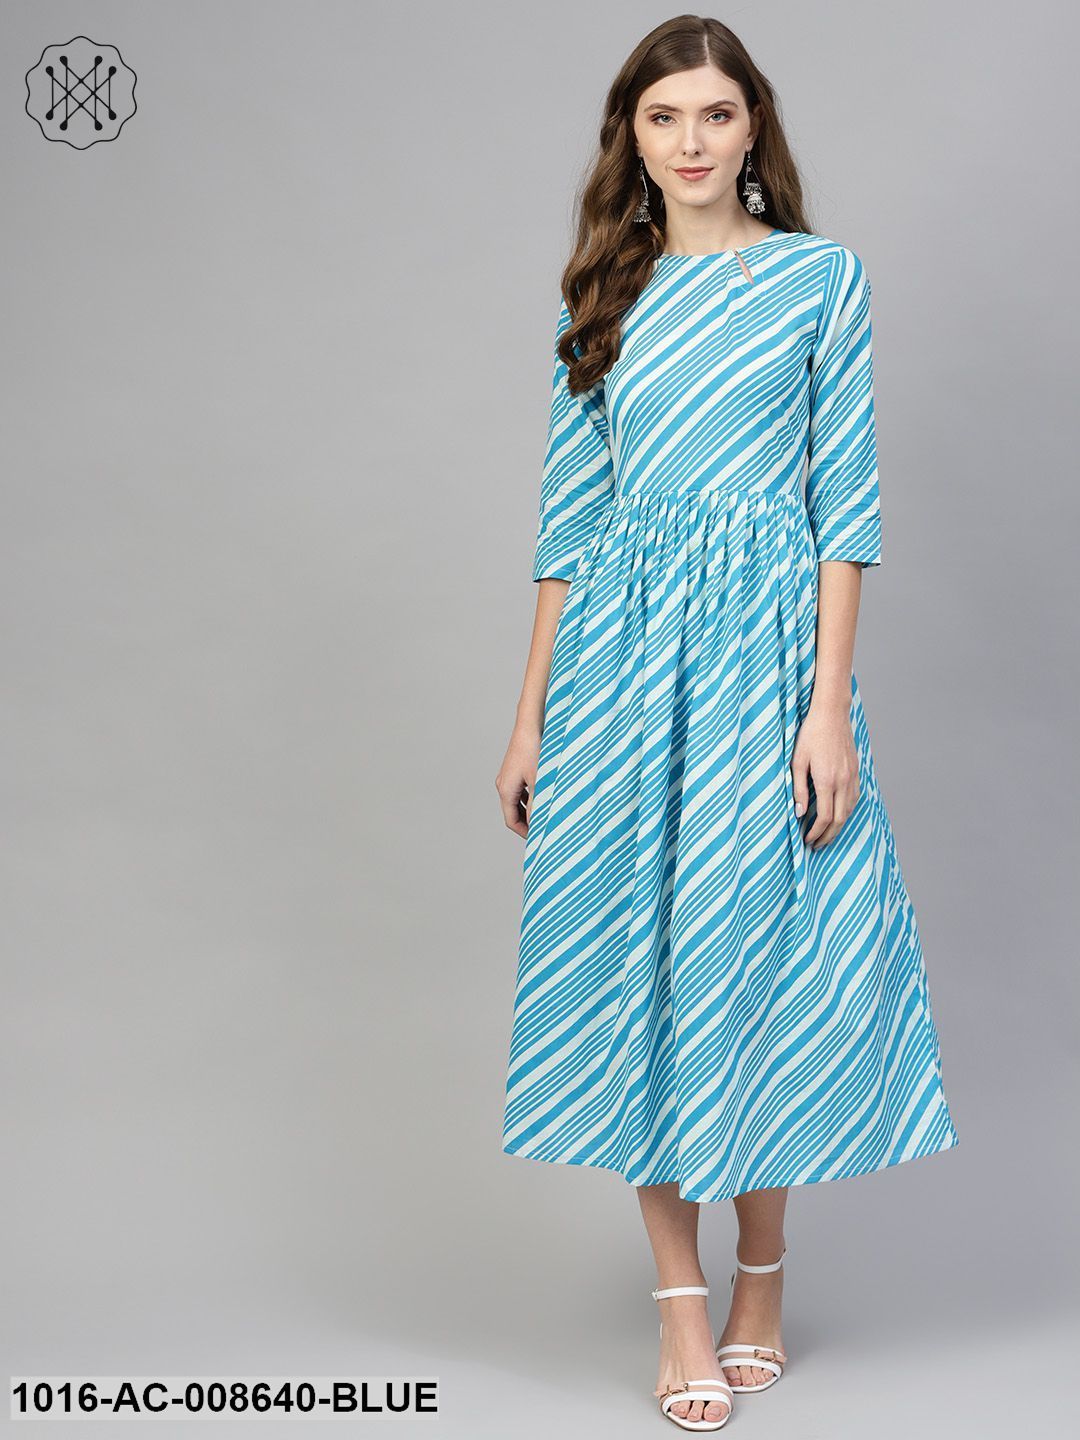 Blue & With Diagonal Striped Dress With Side Keyhole & 3/4 Sleeves